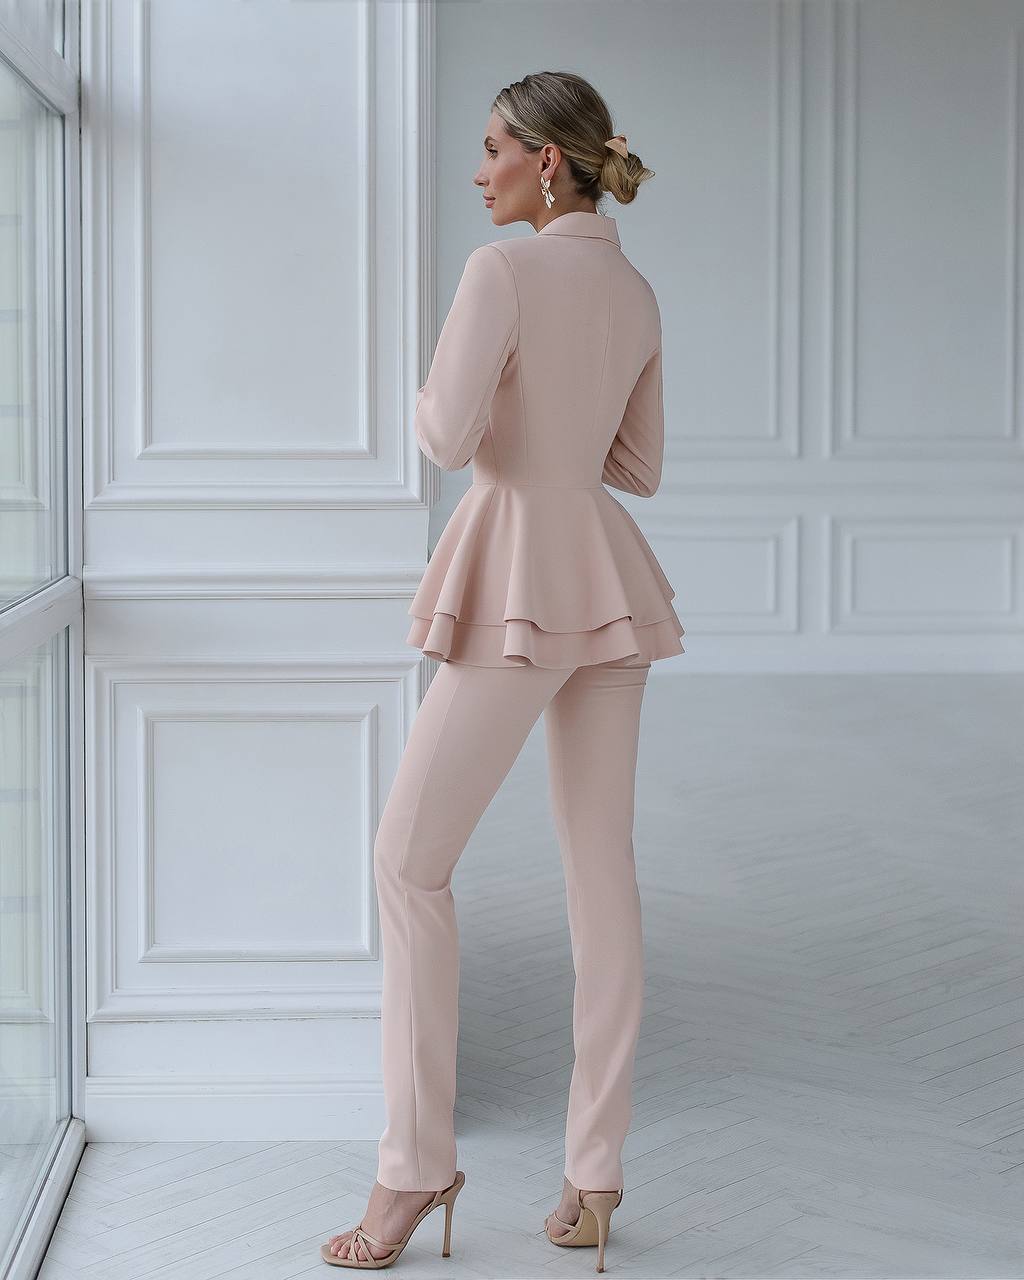 a woman wearing a pink suit and heels